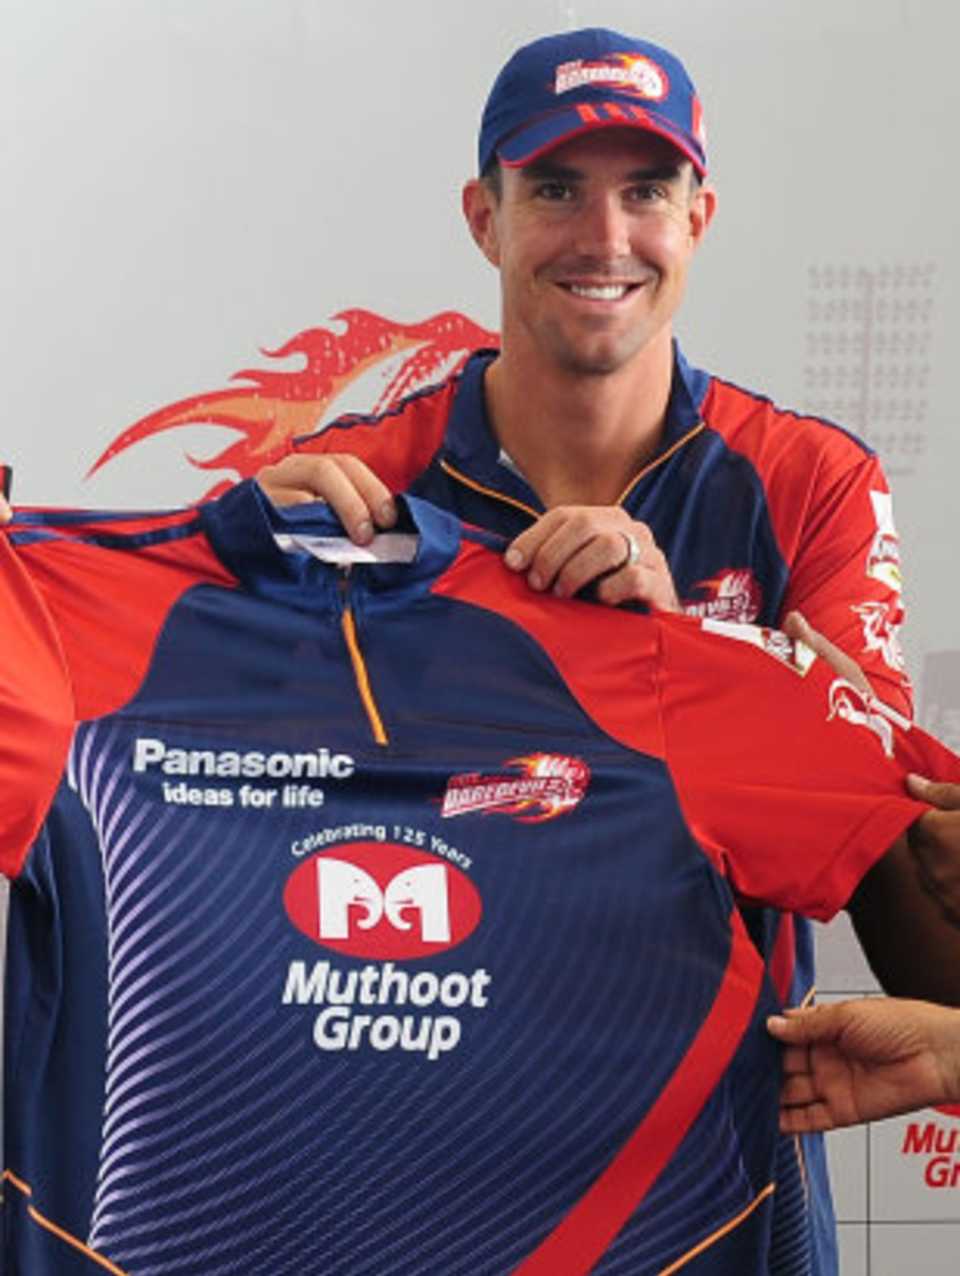 Delhi Daredevils 2015 IPL jerseys and t-shirts now available in India